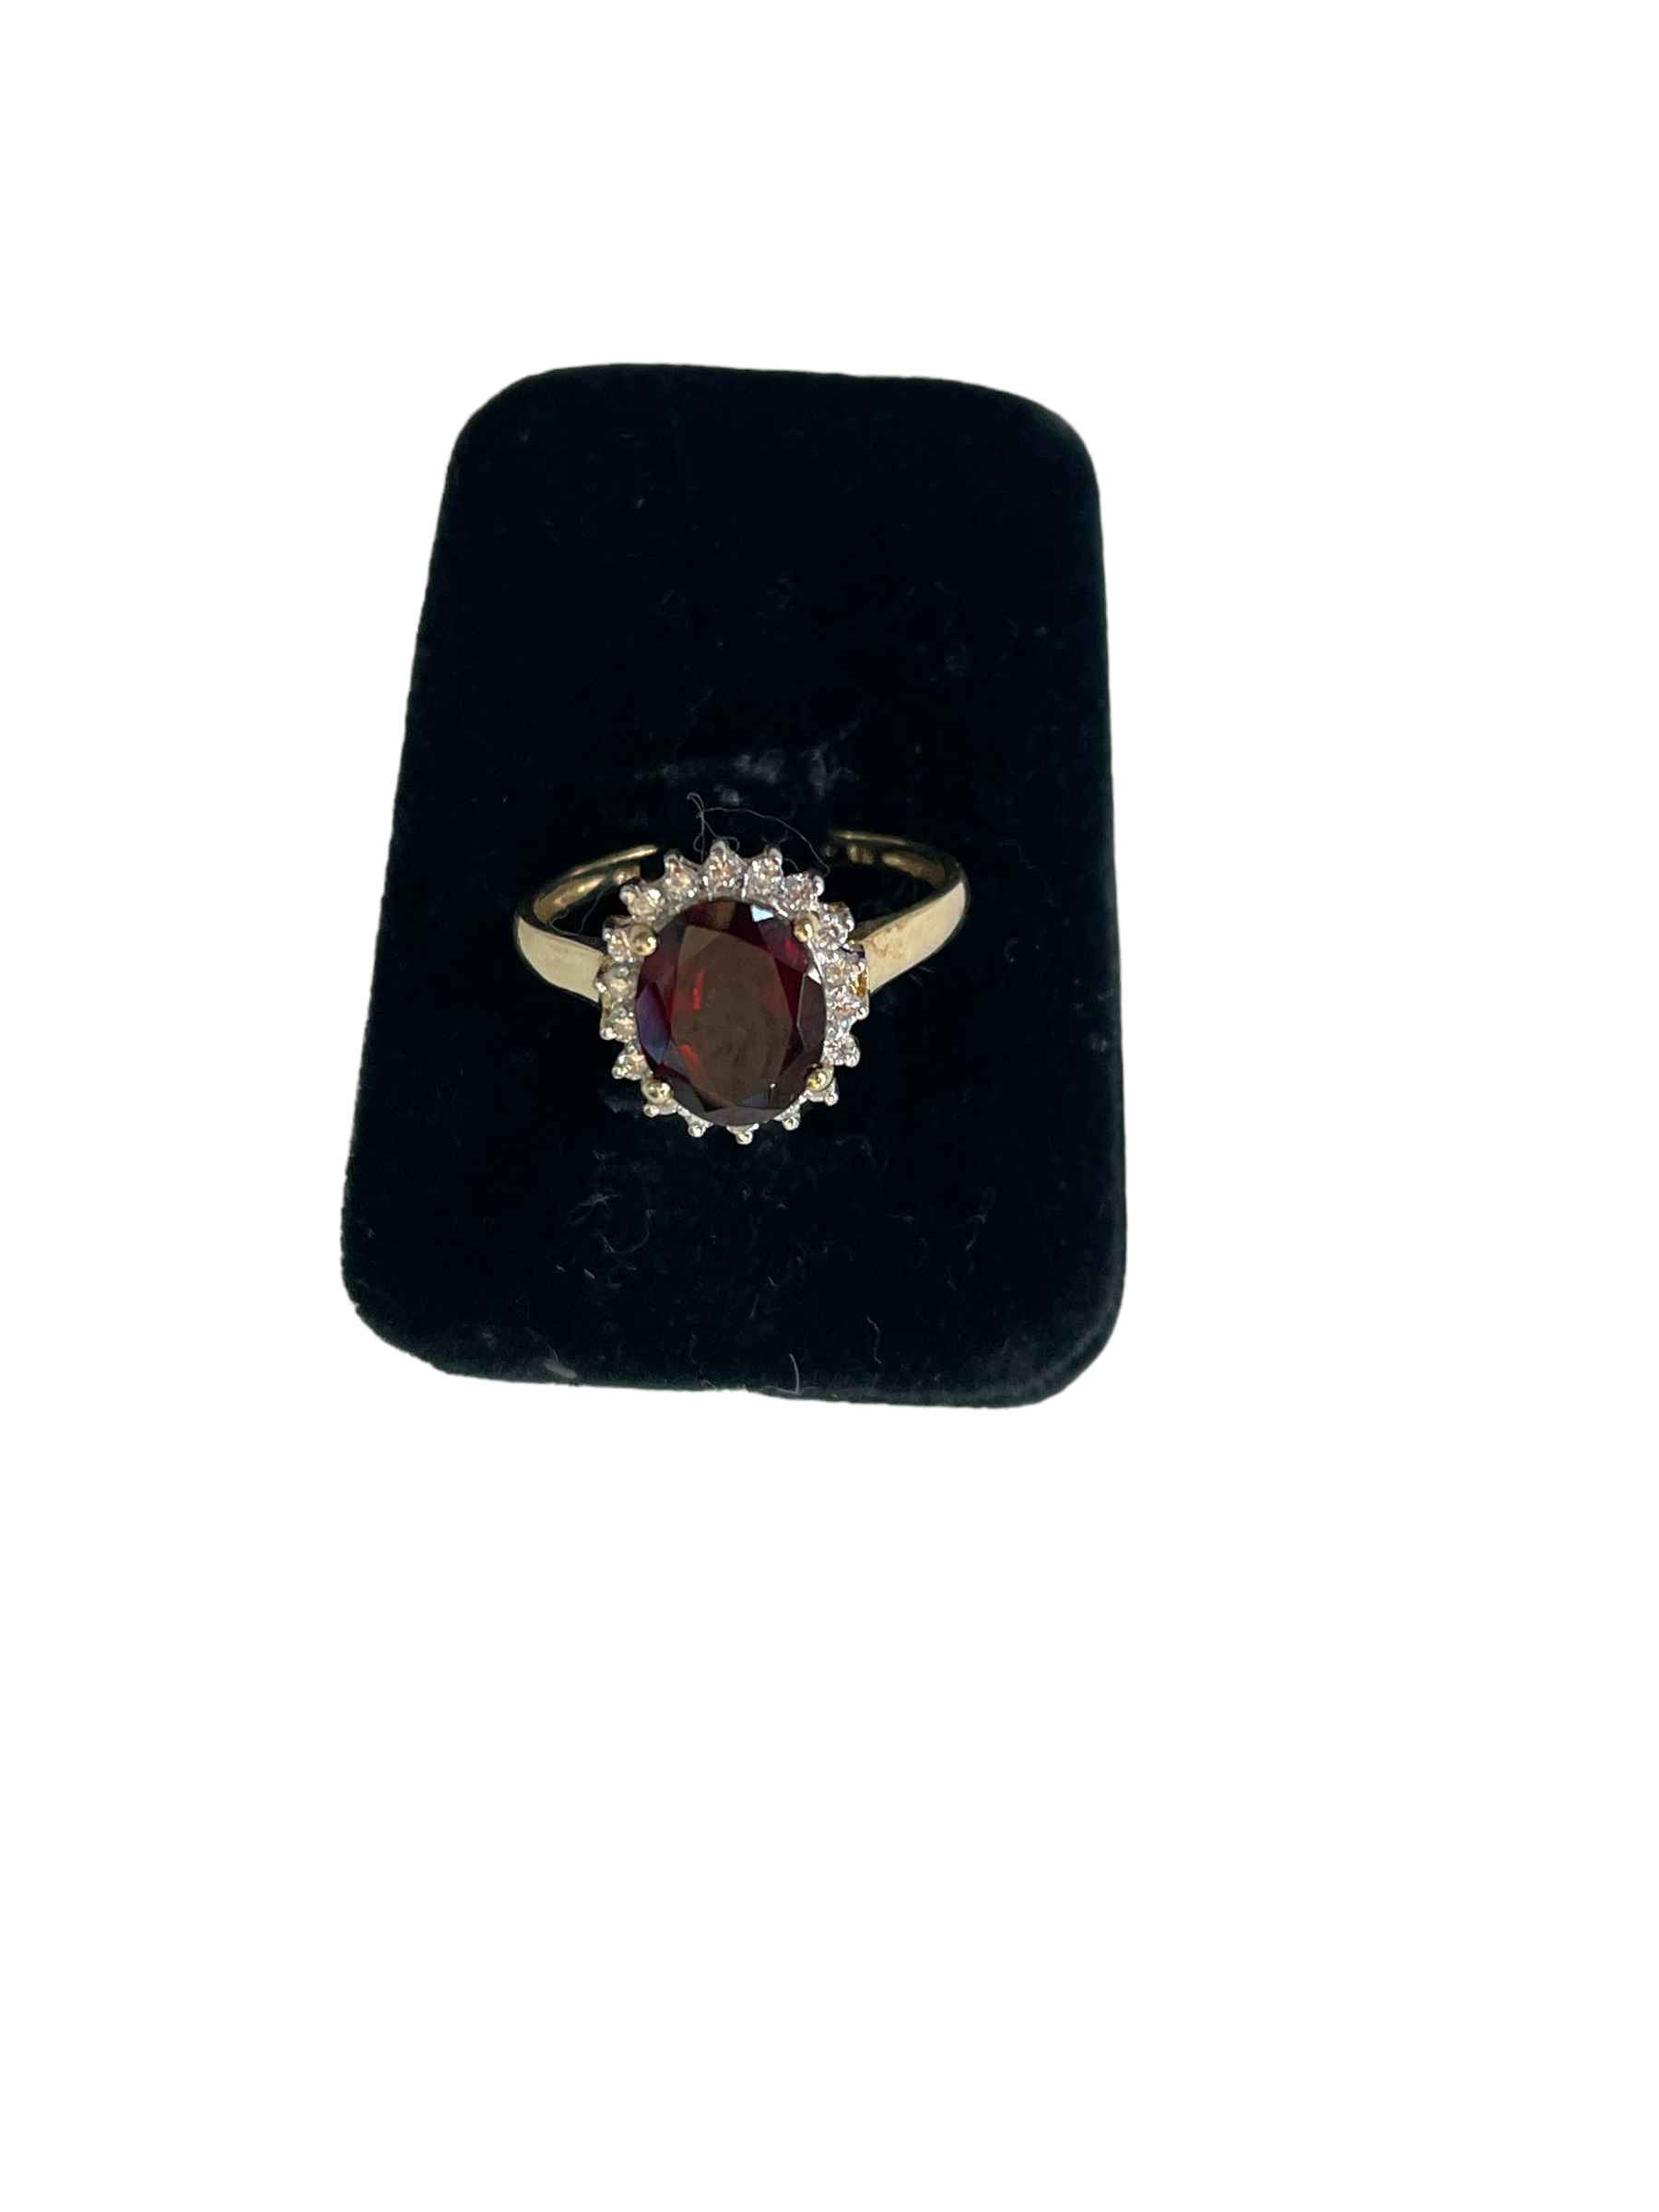 Garnet and diamond cluster 9 carat gold ring, size R/S.